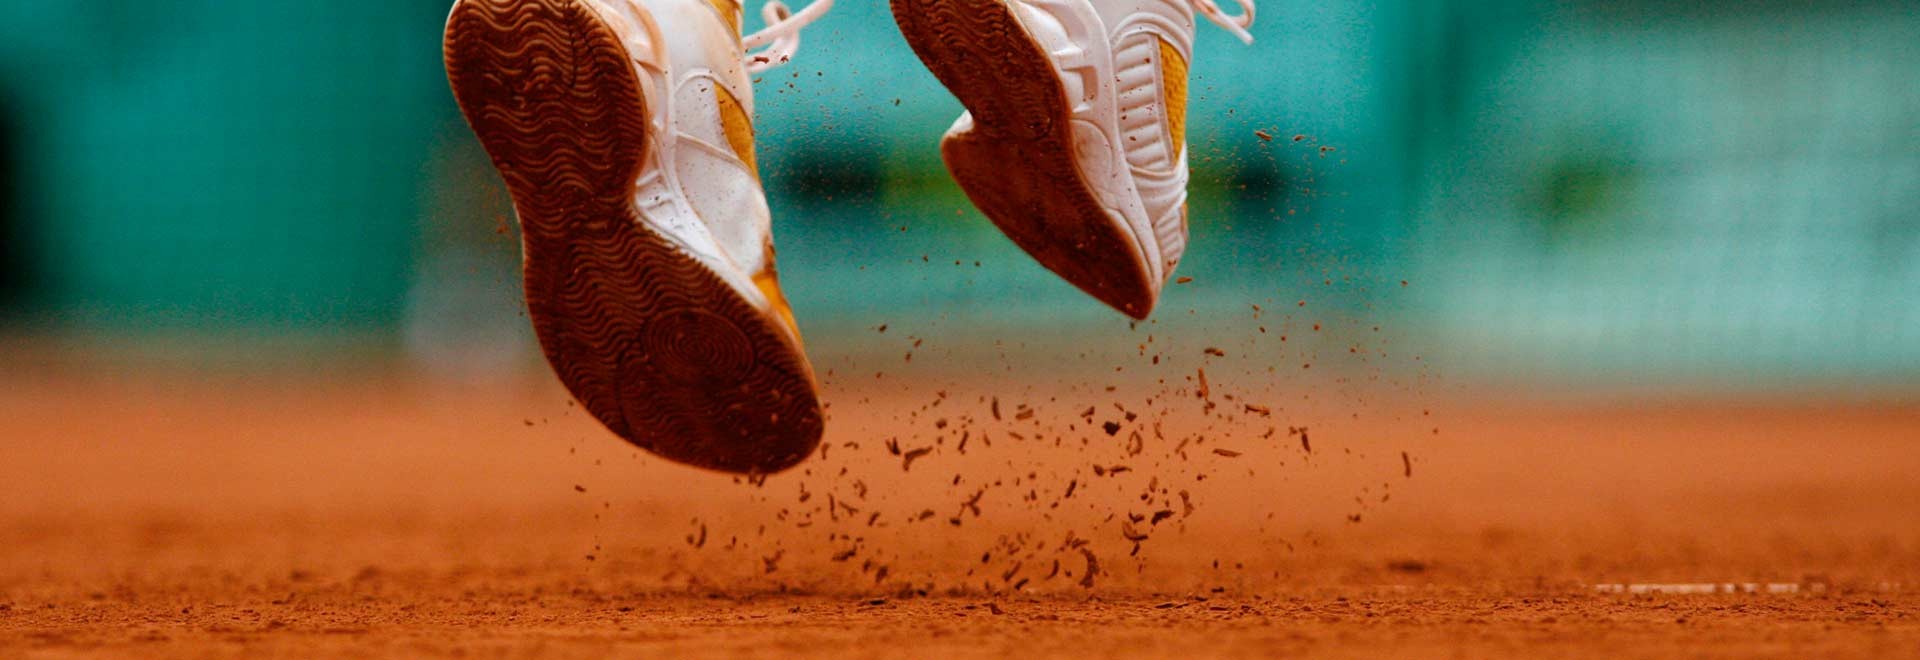 Tennis Tournament Packages - Book a Tennis Tournament and Tour Package